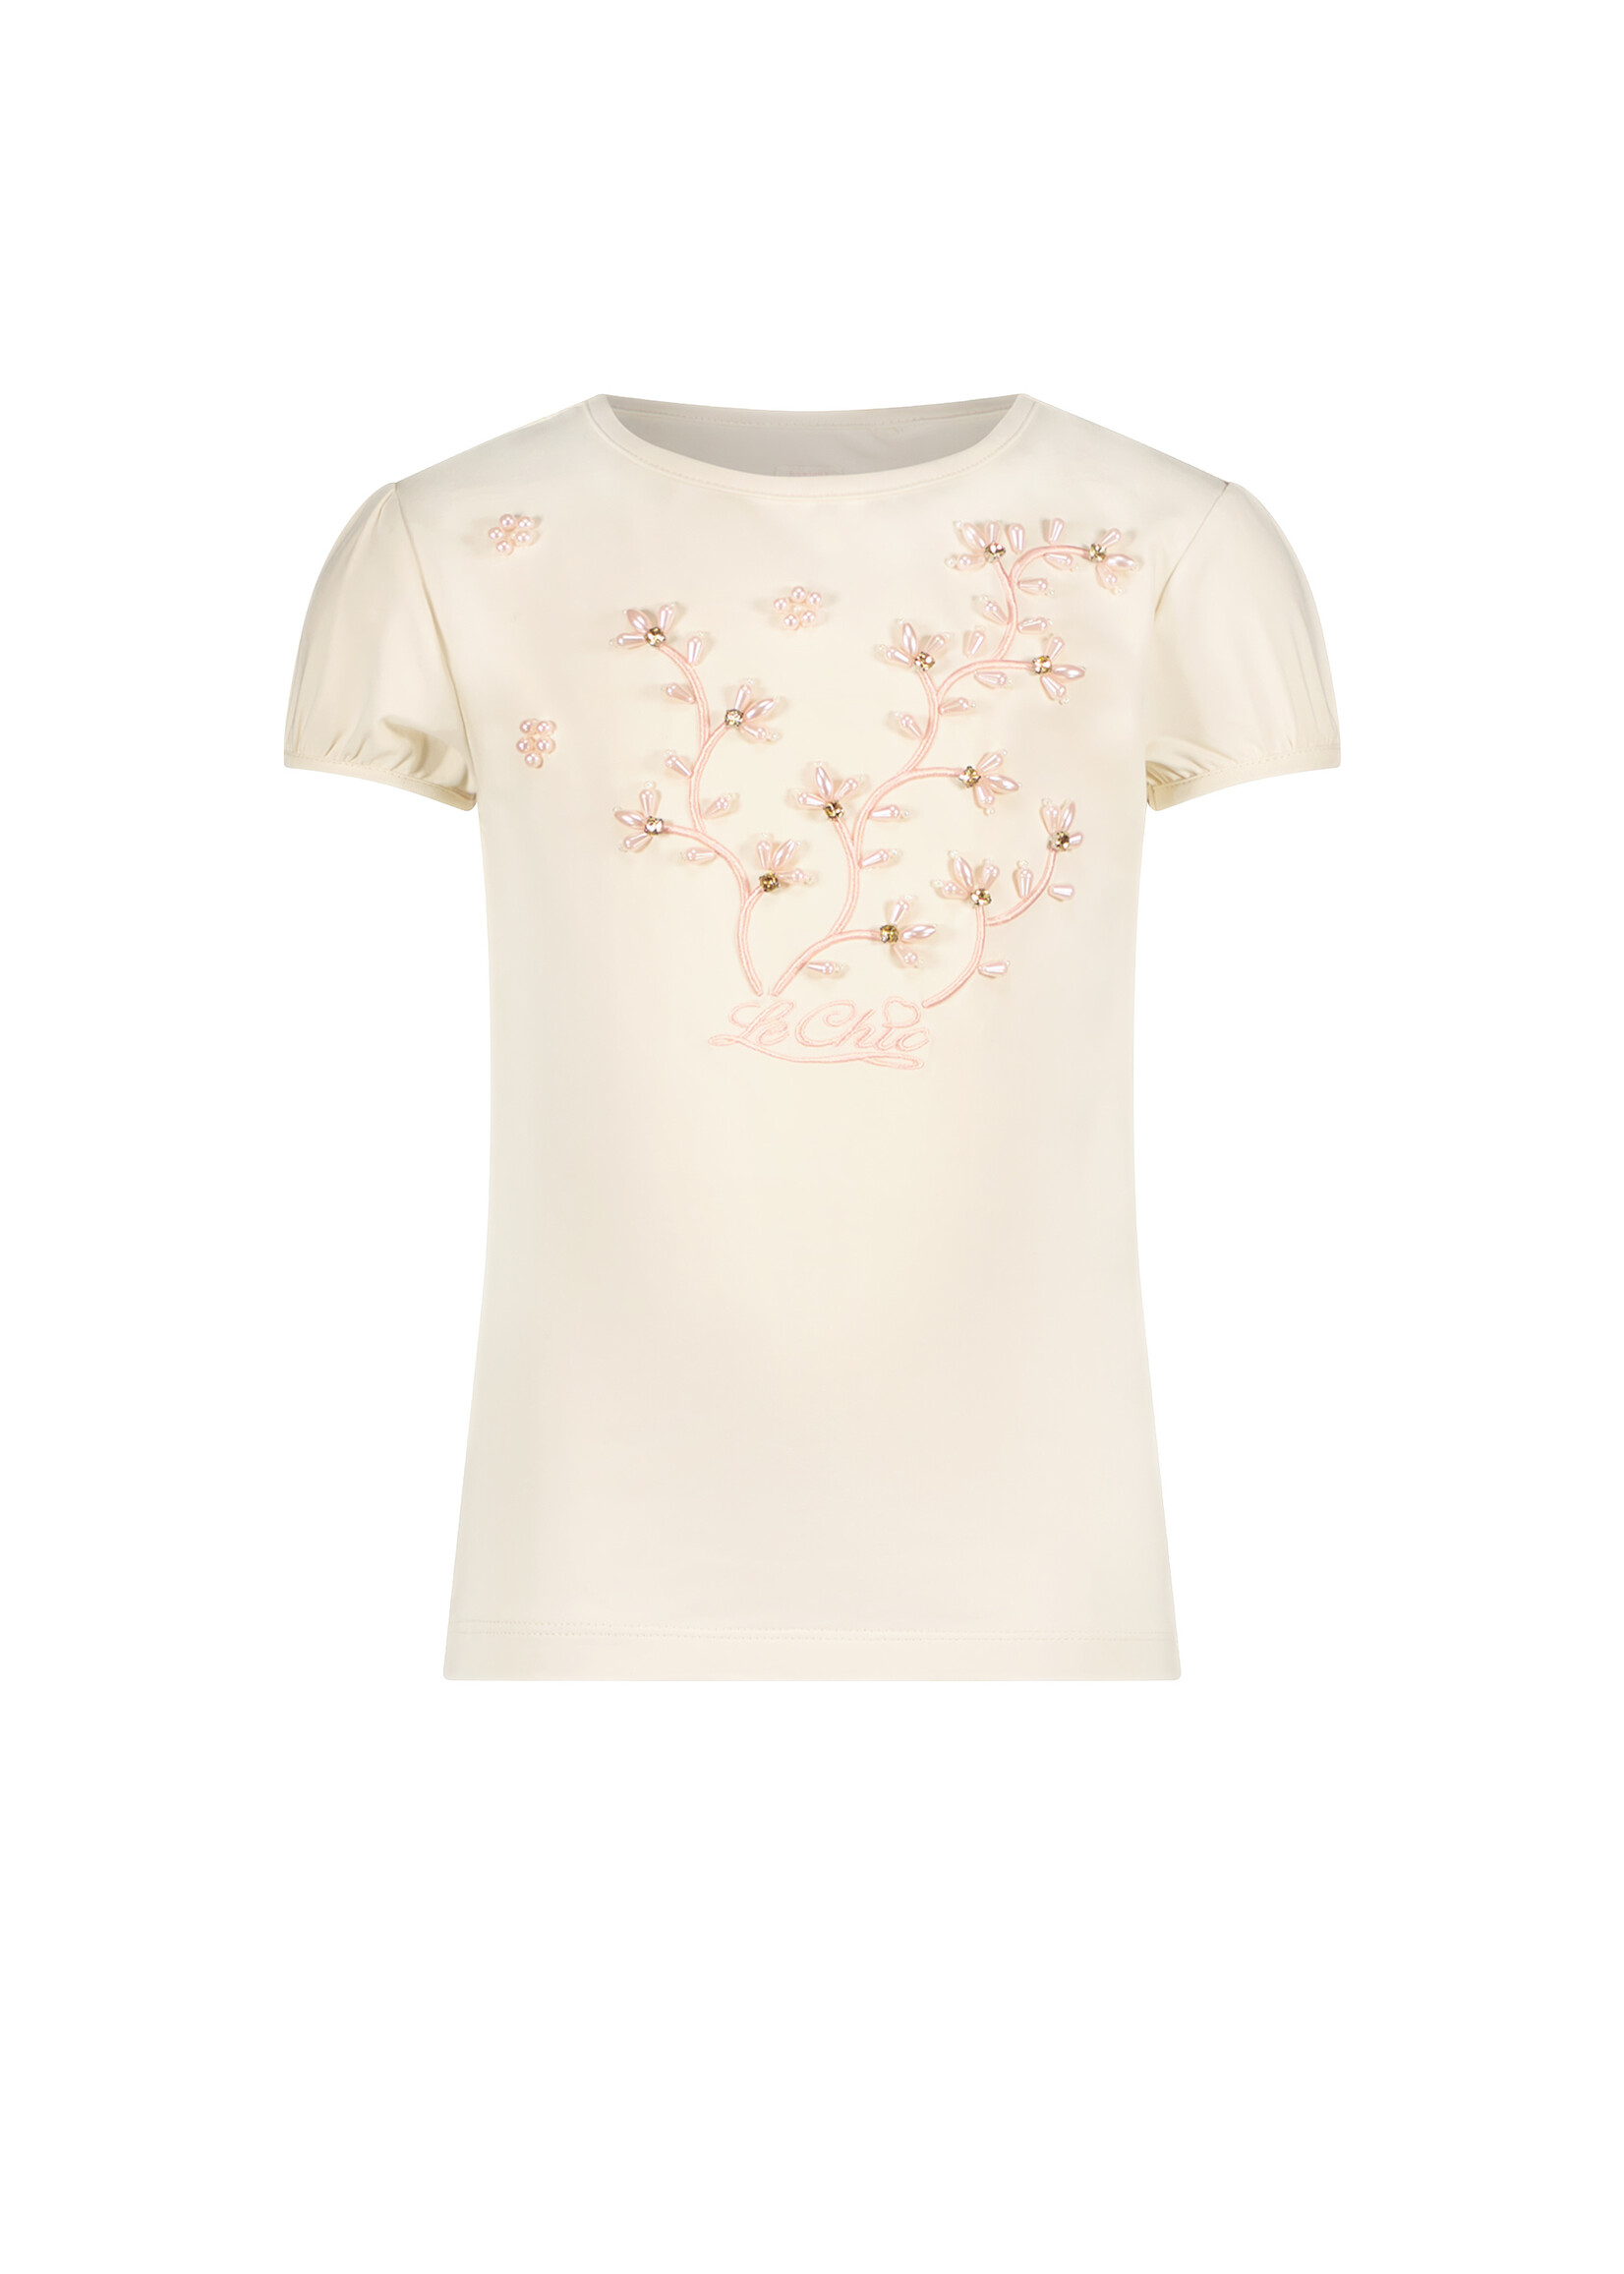 Le Chic Girls Kids C312-5411 NOMMY luxury flowers T-shirt Pearled Ivory